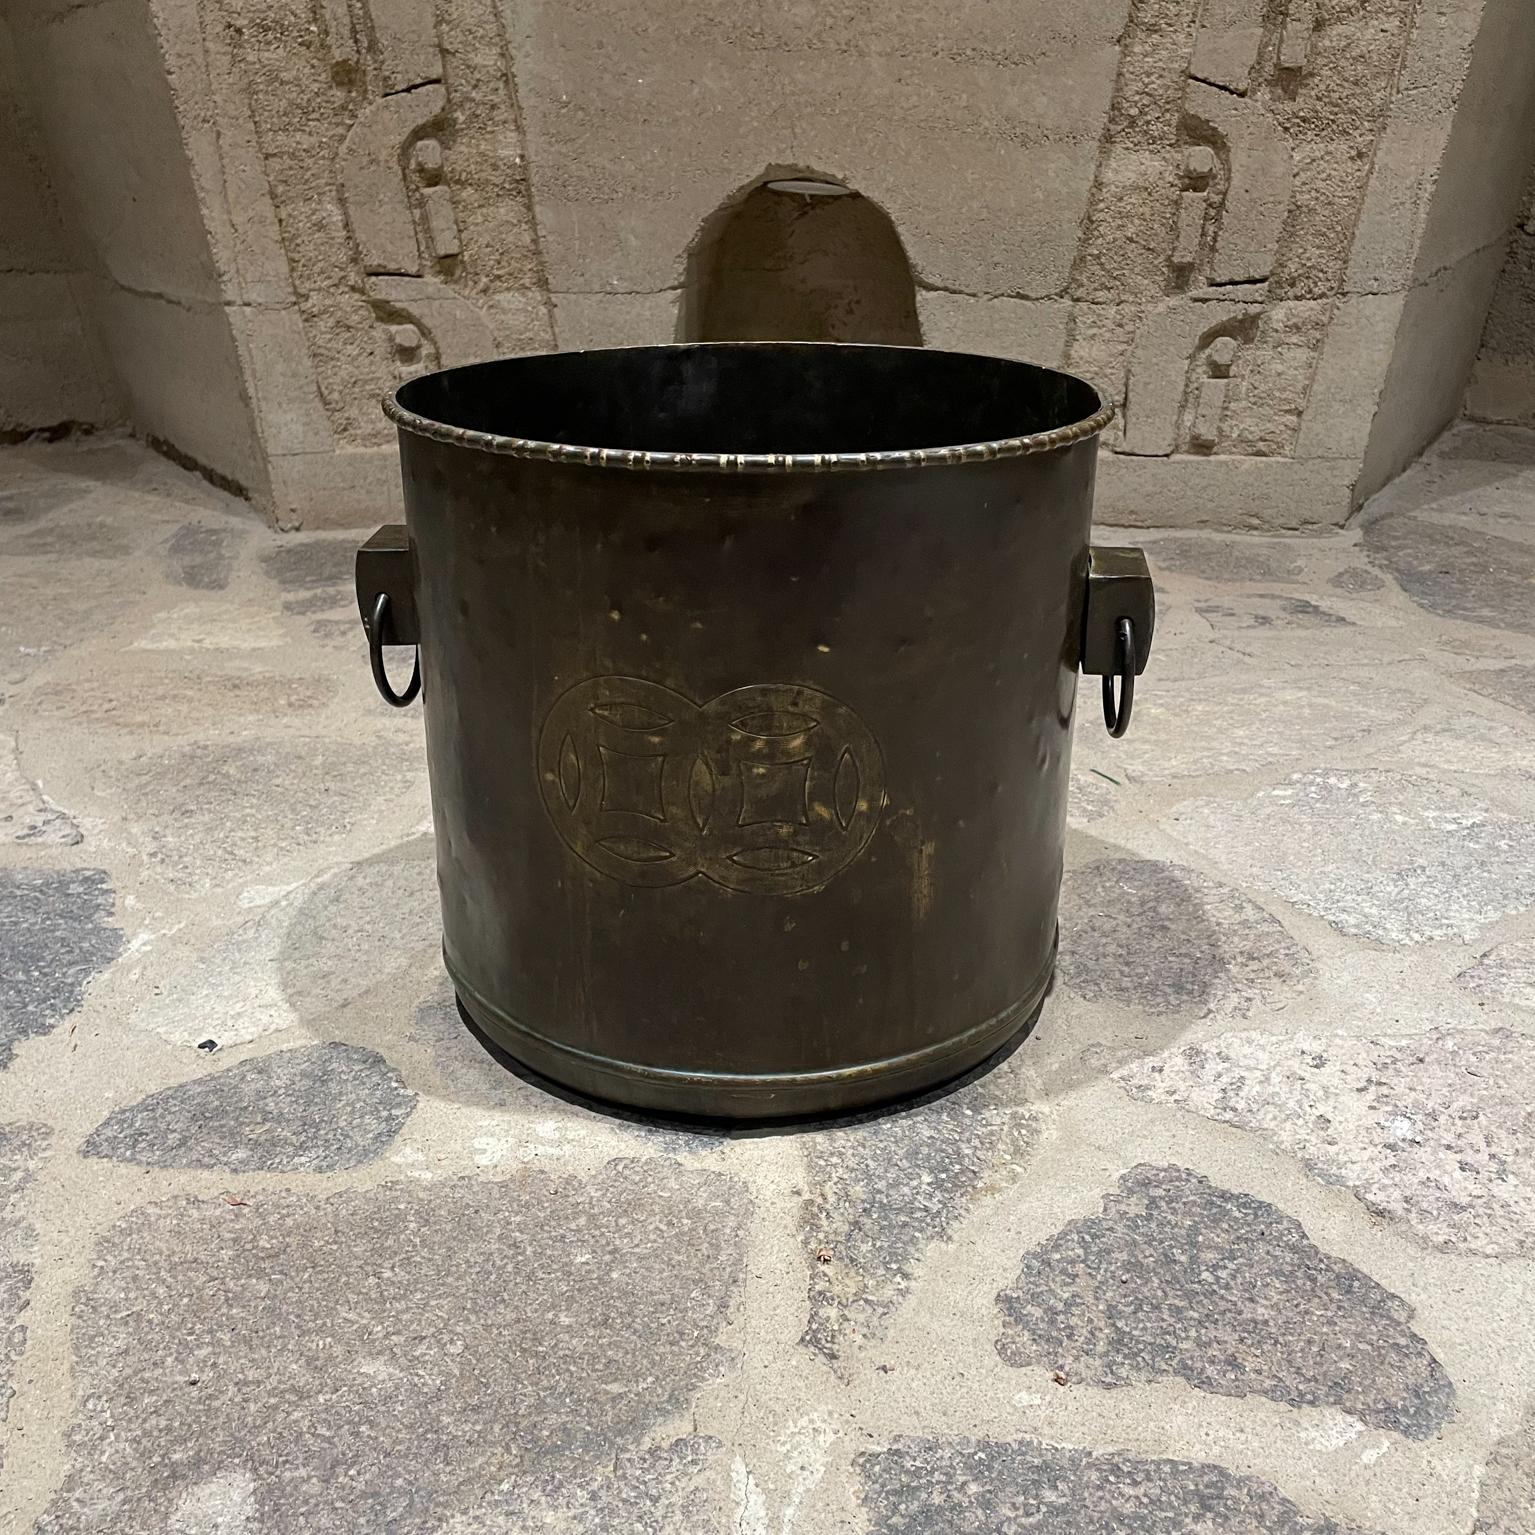 Planter Pot Bucket
Large Antique Chinese Bucket Planter Pot in Bronze
Measures: 13 tall x 13.85 diameter x 14.25 w
Large bucket with oriental-Chinese decoration. Double handles with rings.
Beautiful unrestored vintage patina. Vintage wear